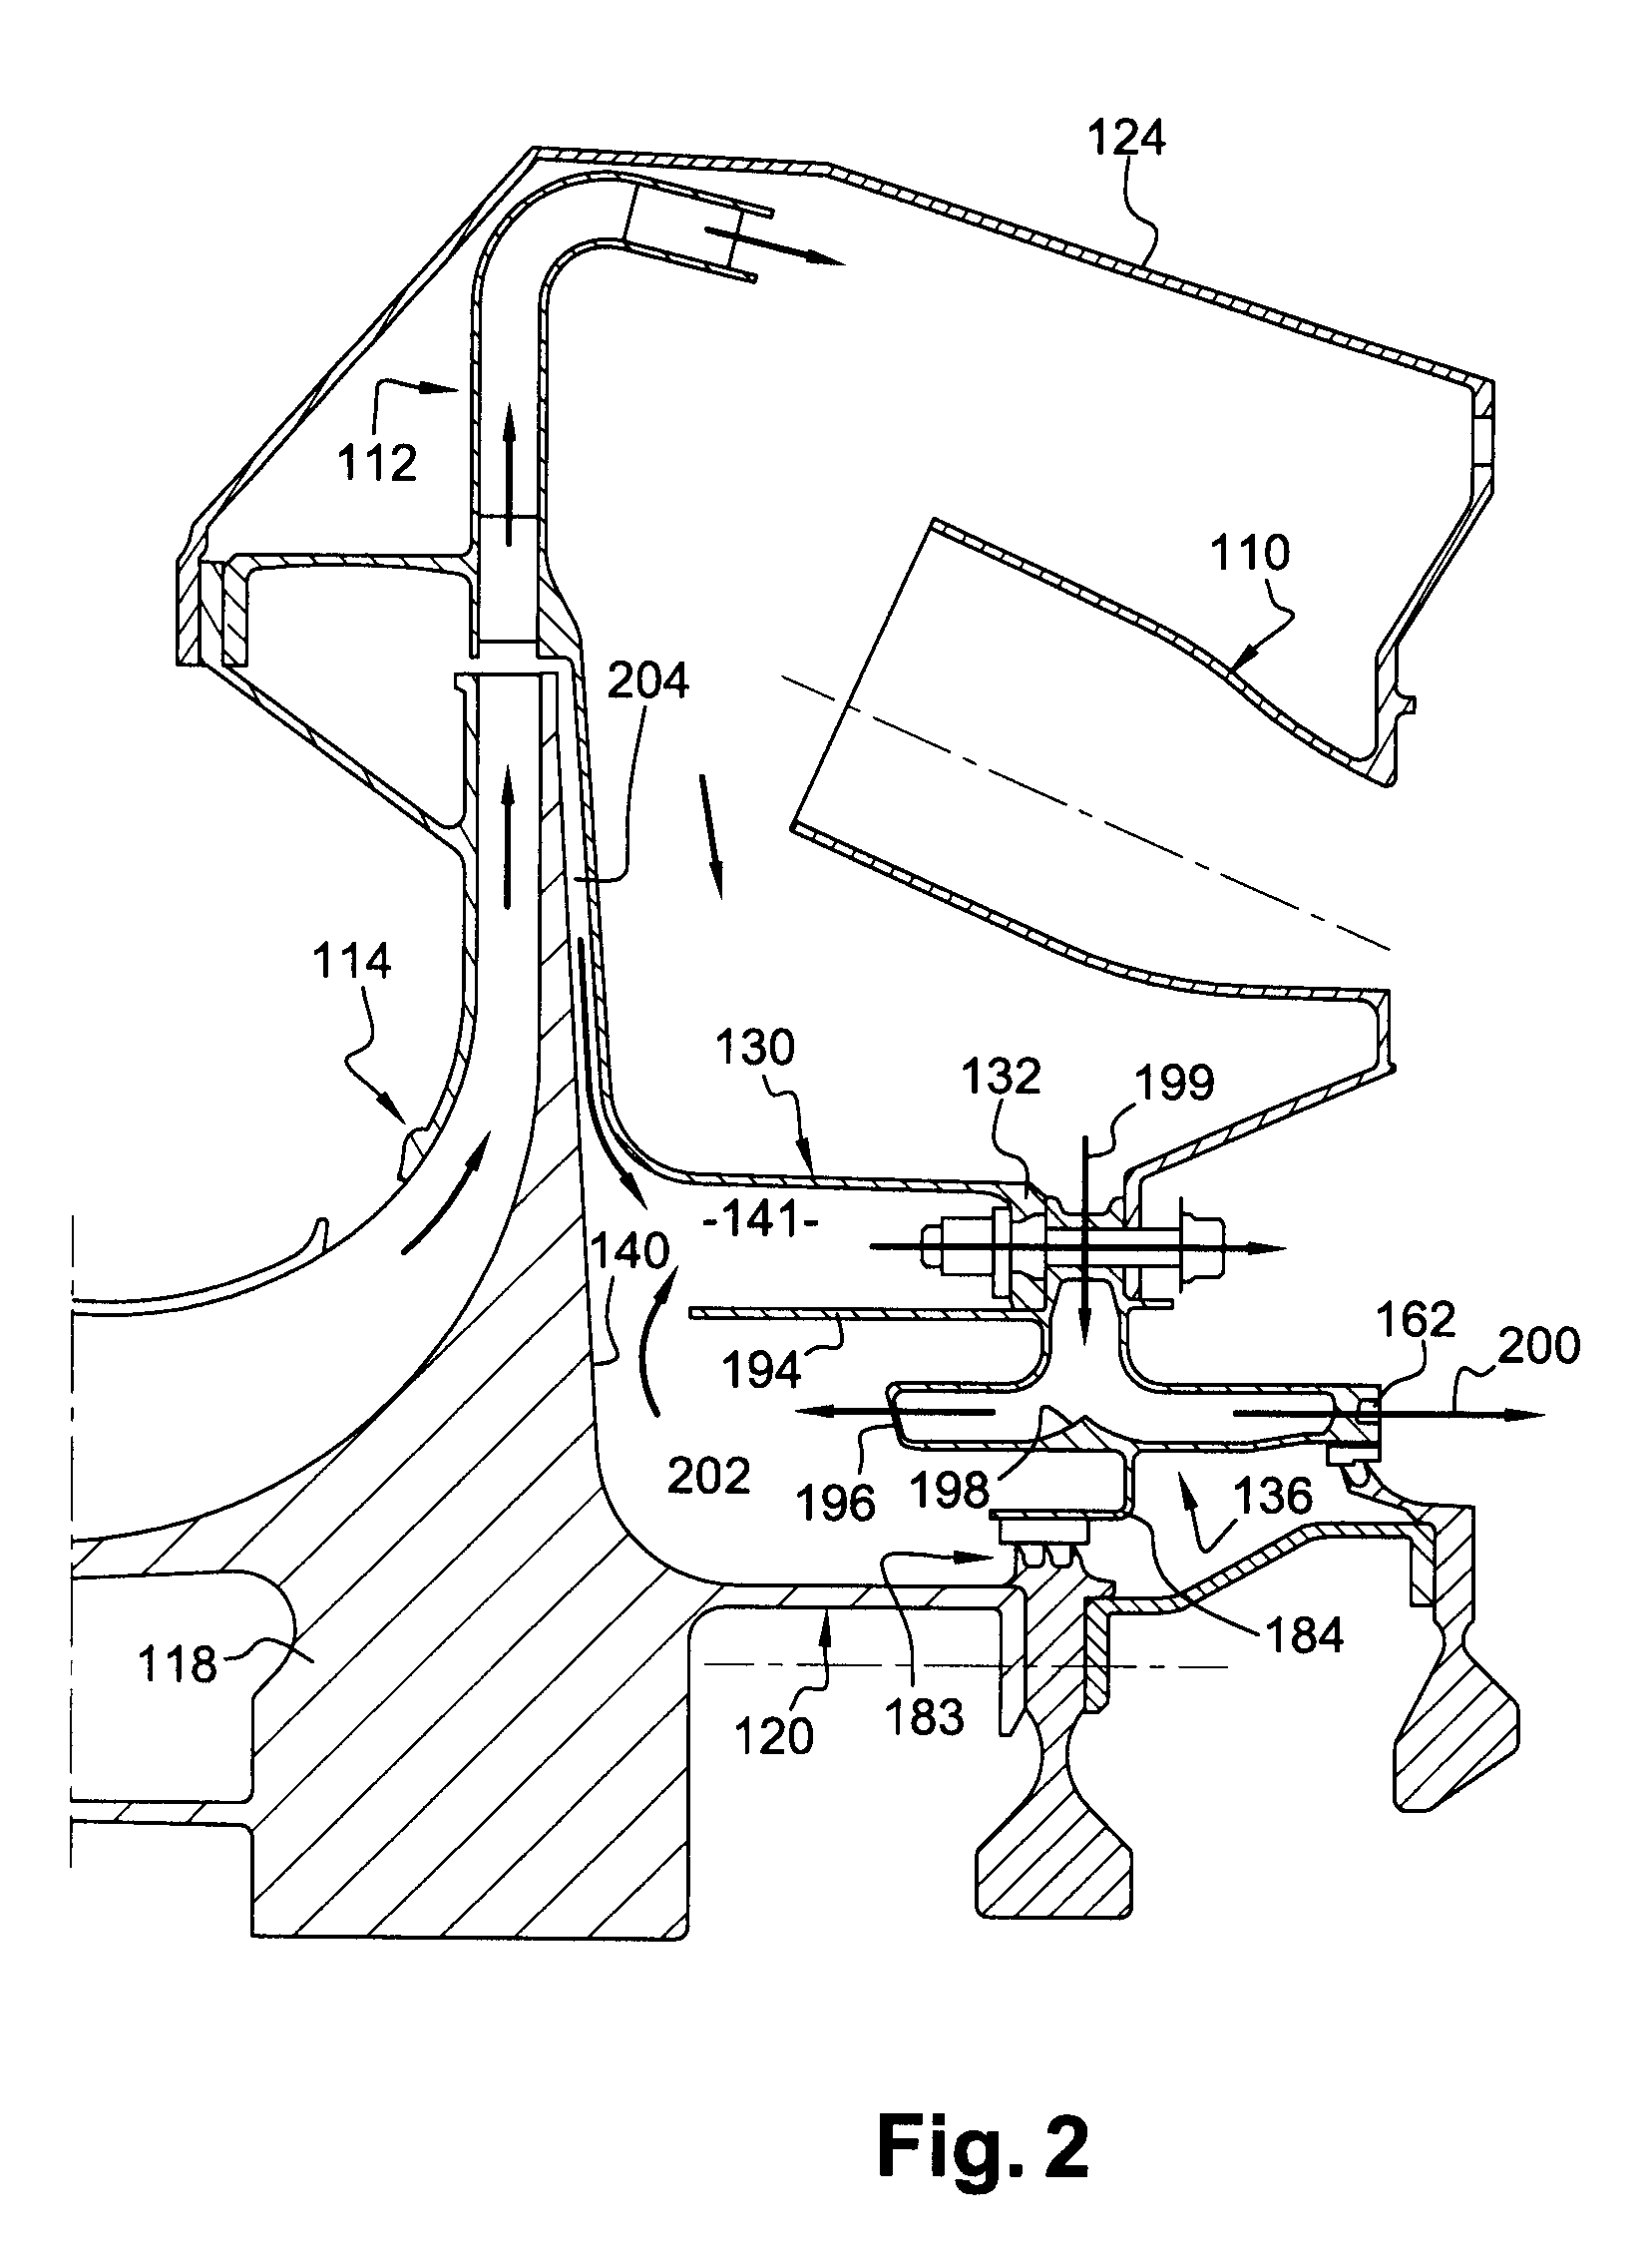 Turbomachine comprising a system for cooling the downstream face of an impeller of a centrifugal compressor